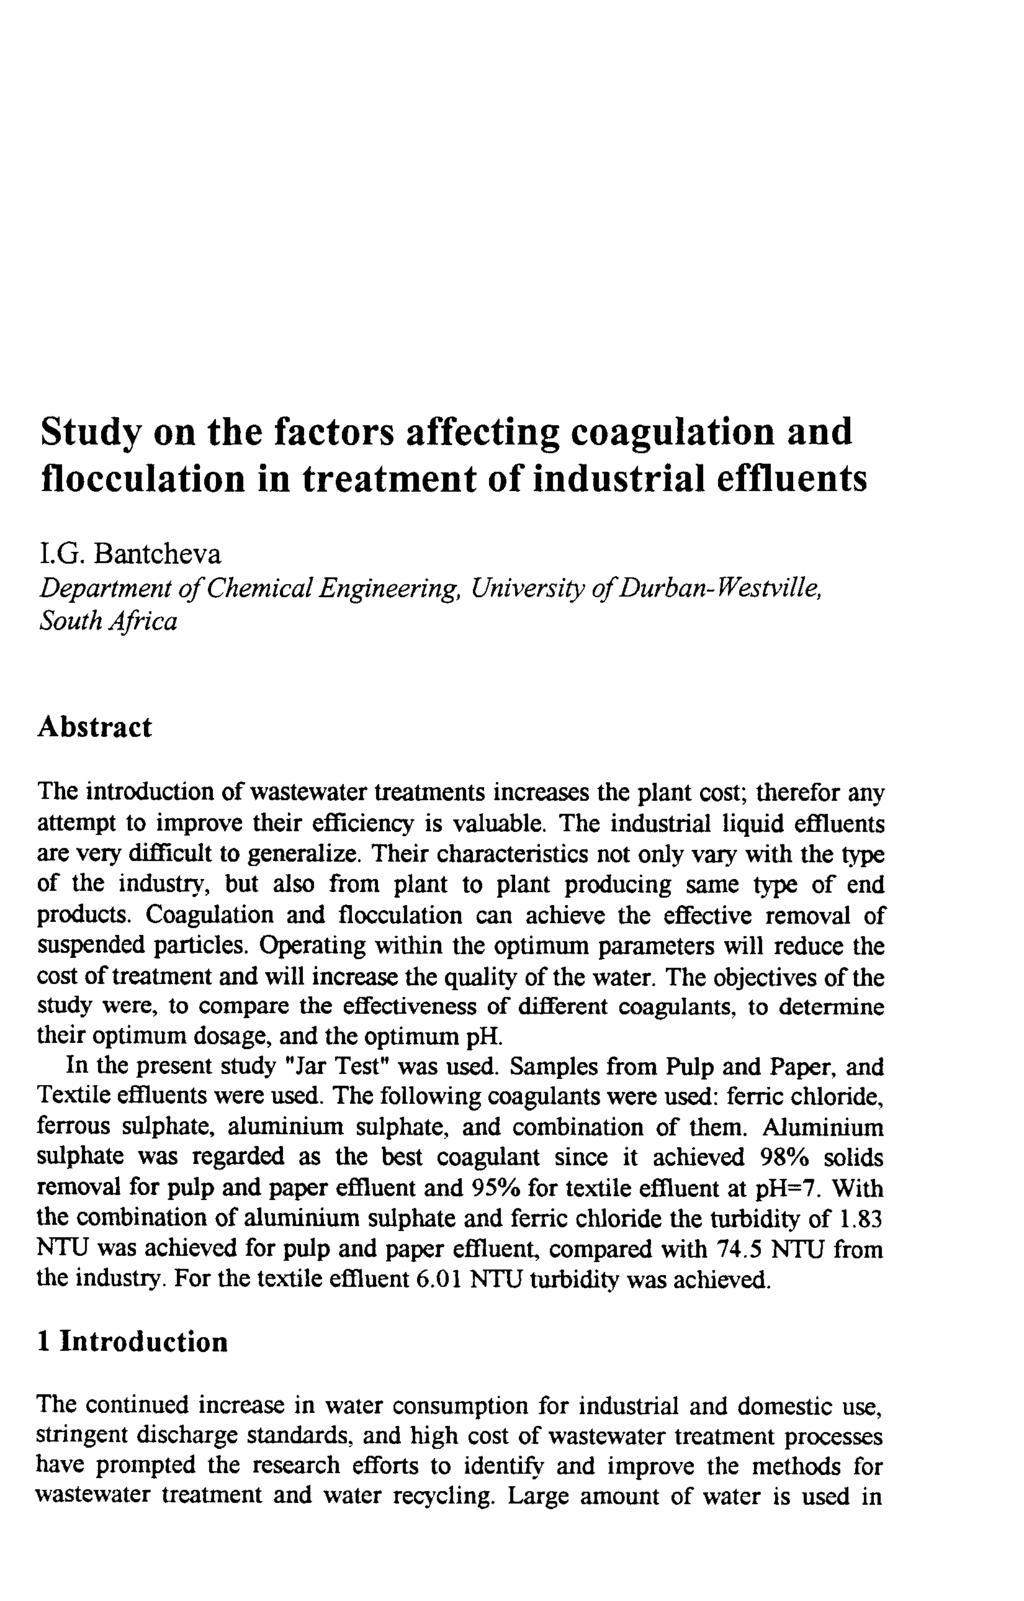 Study on the factors affecting coagulation and flocculation in treatment of industrial effluents I.G.